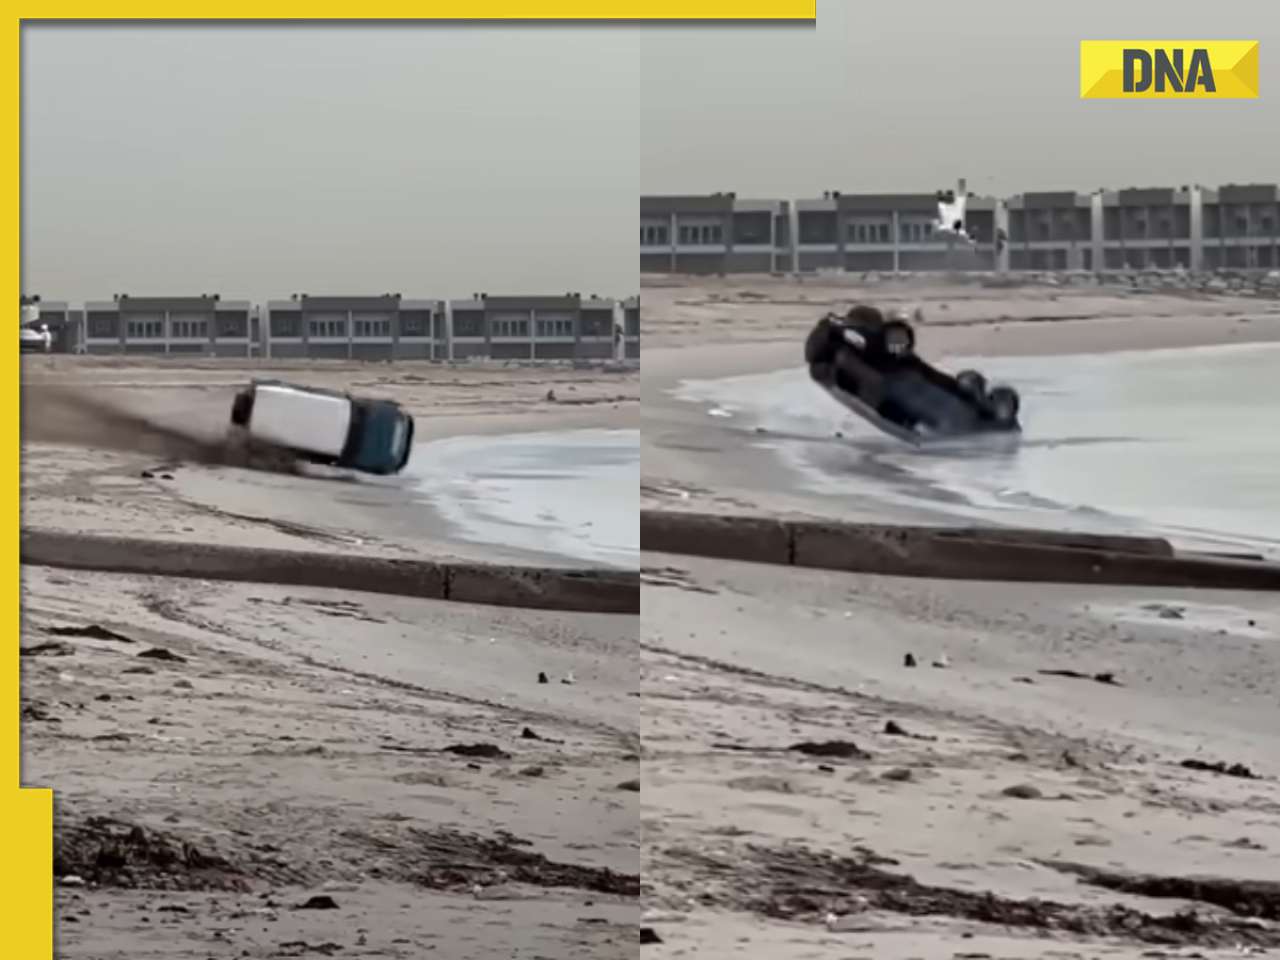 Driver's reckless stunt sends SUV flying on beach, video goes viral